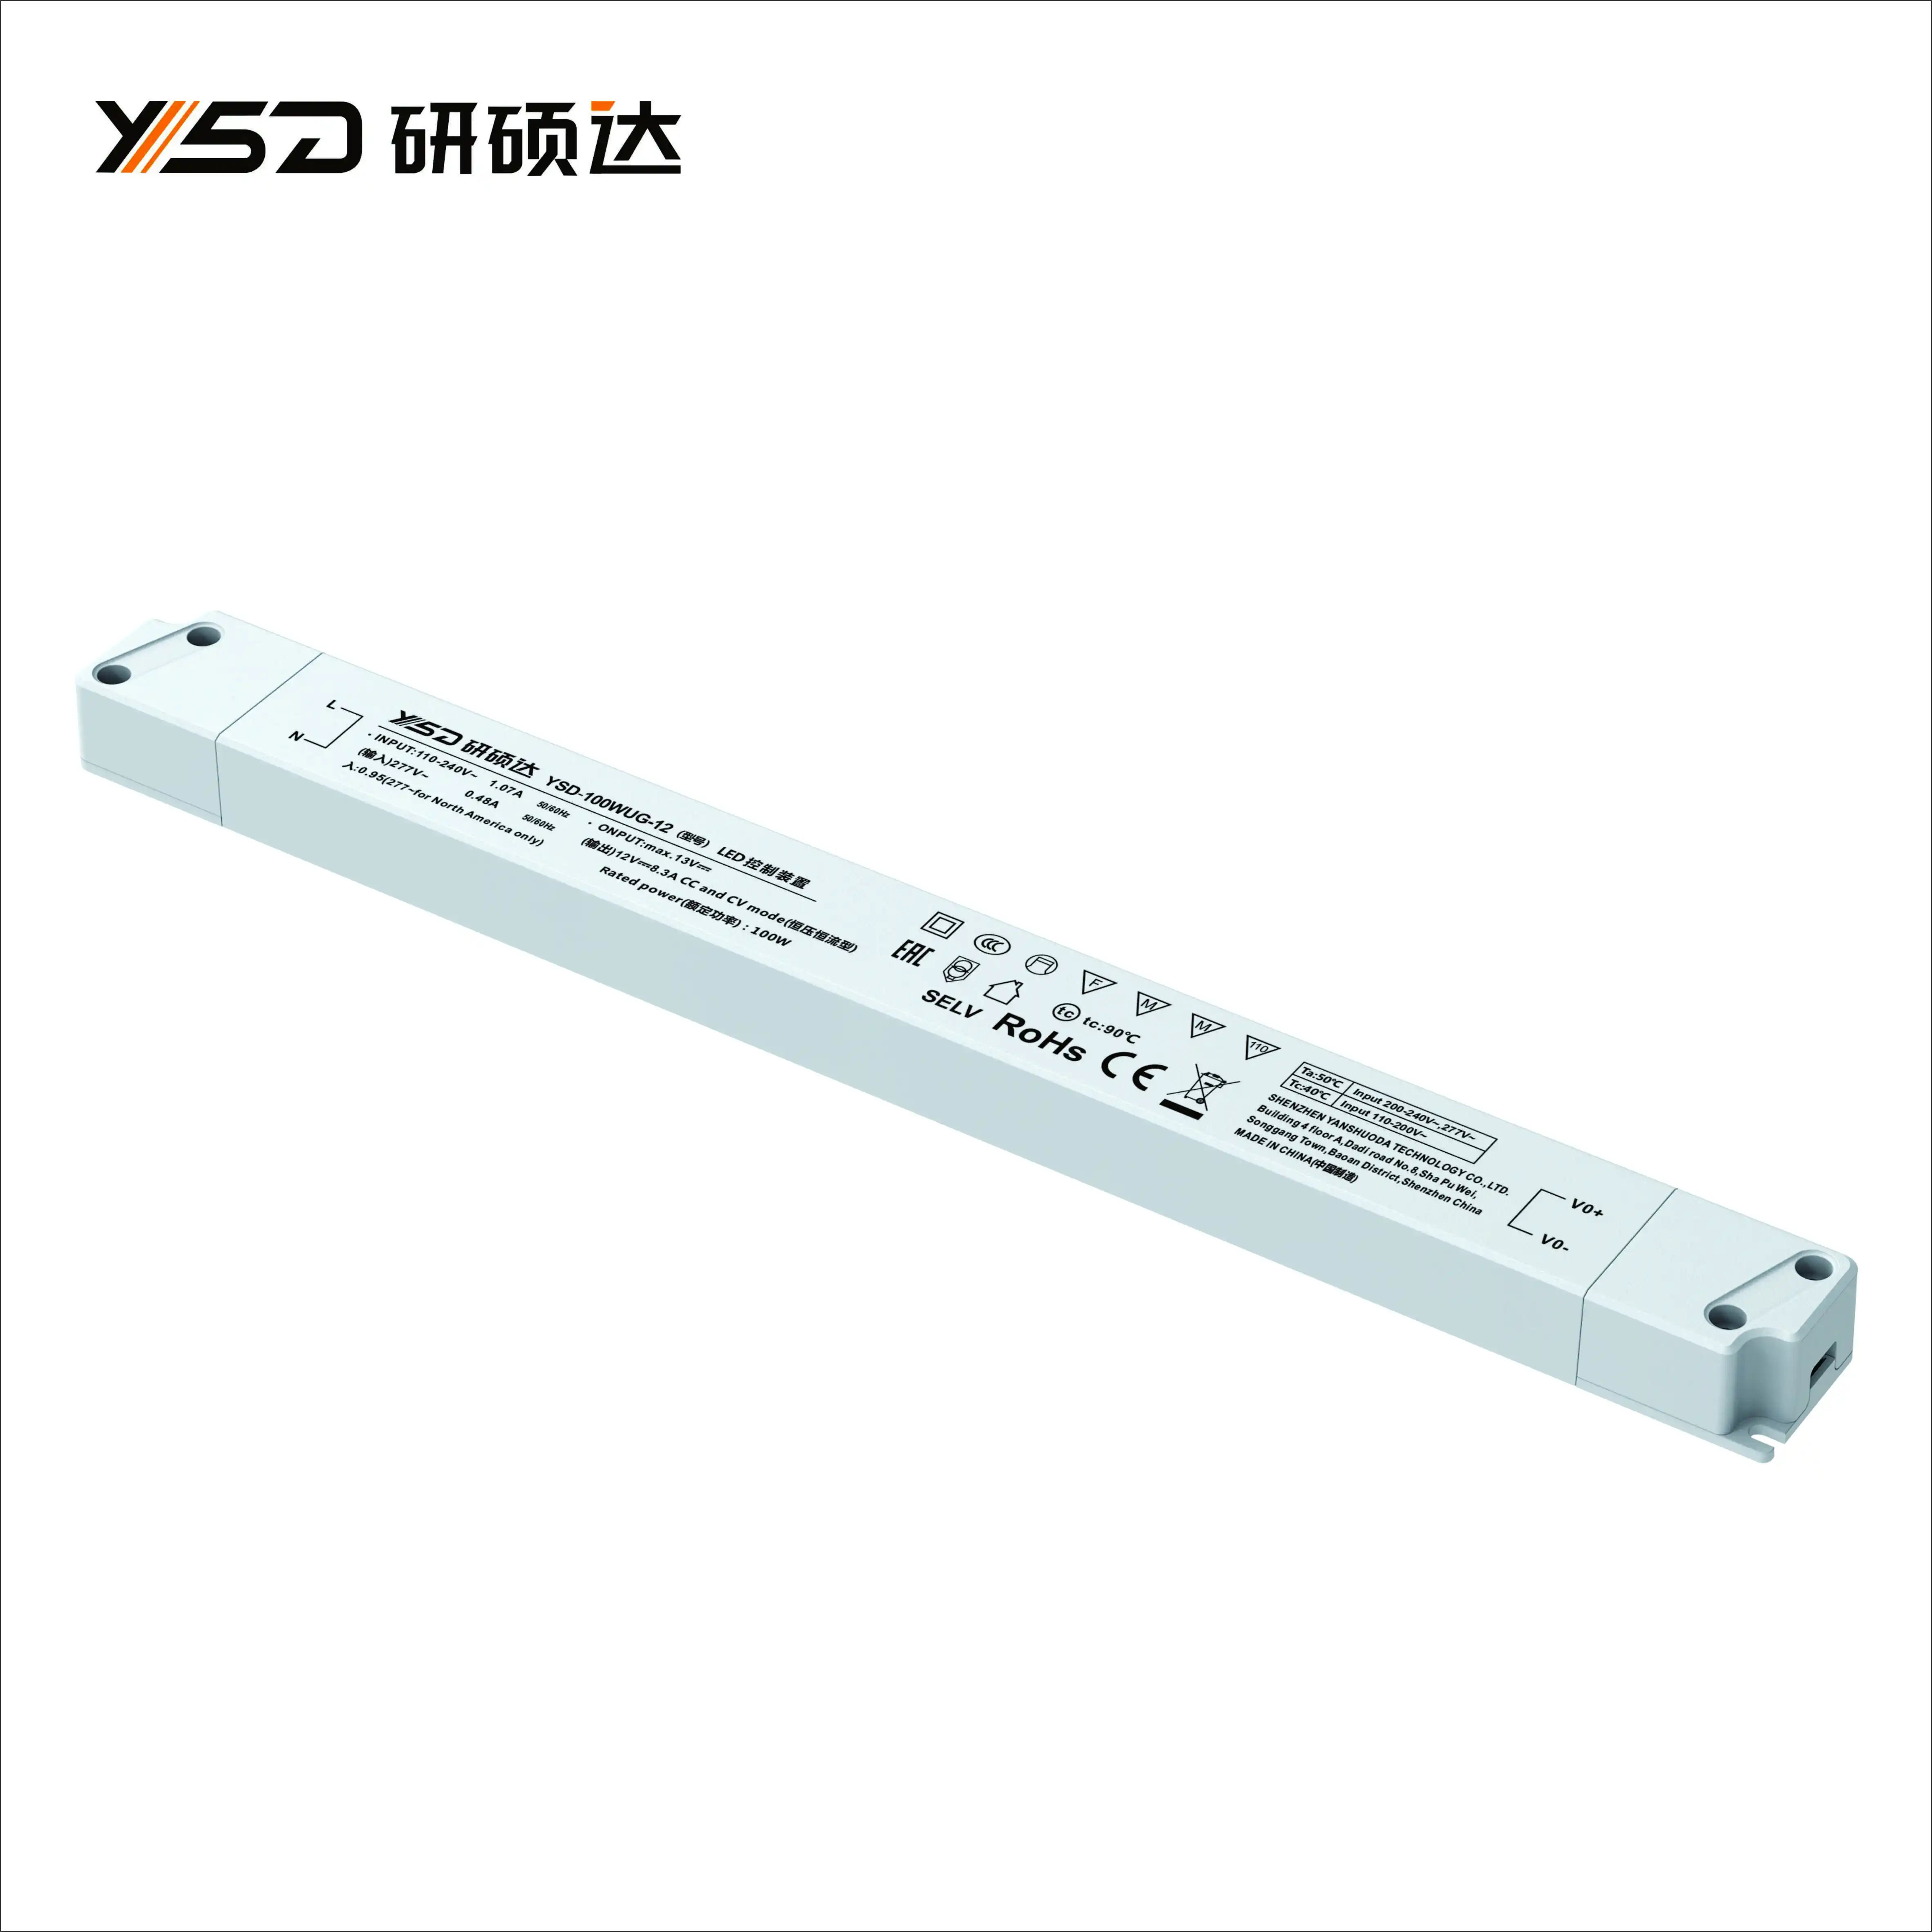 5 Years Warranty Led Constant Current High Power 150W No Flicker Lamp Power Supply Slim Linear Led Drivers